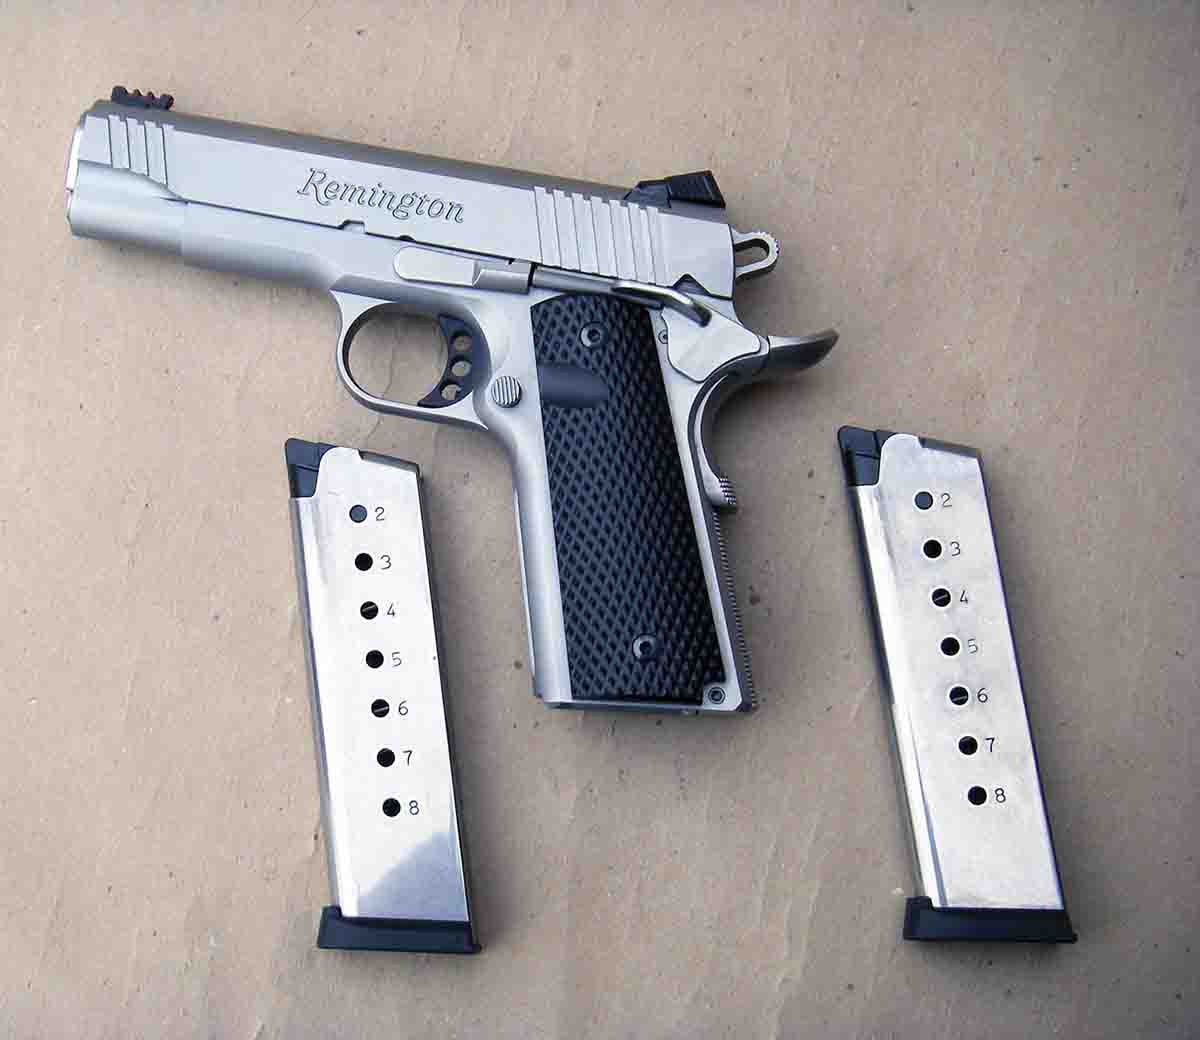 The Remington Model 1911R1S Enhanced Commander comes standard with two eight-round magazines.